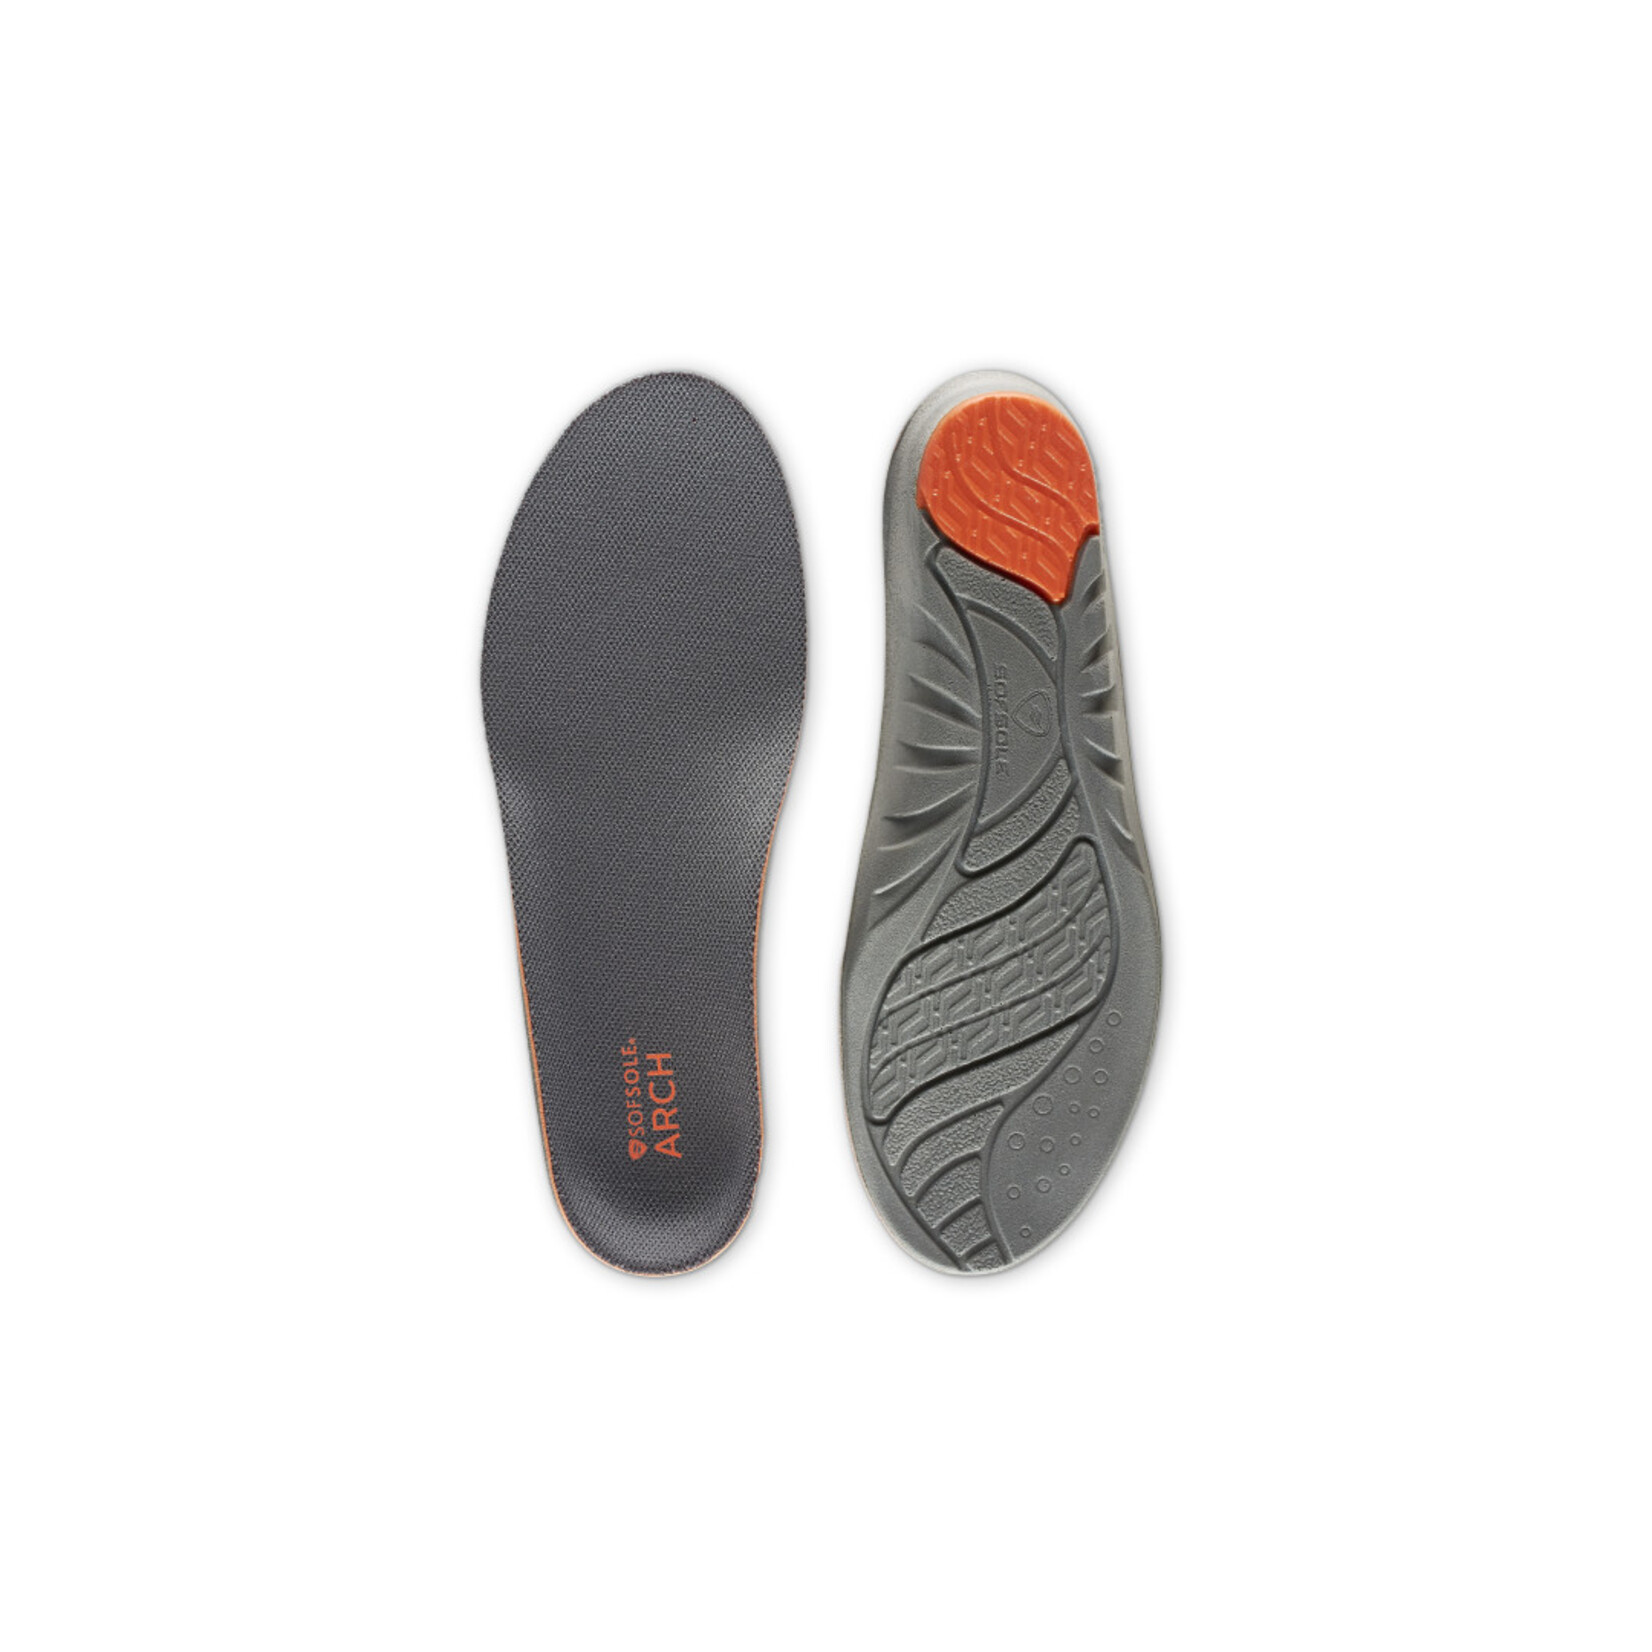 Sofsole Sofsole Men's Arch Insole